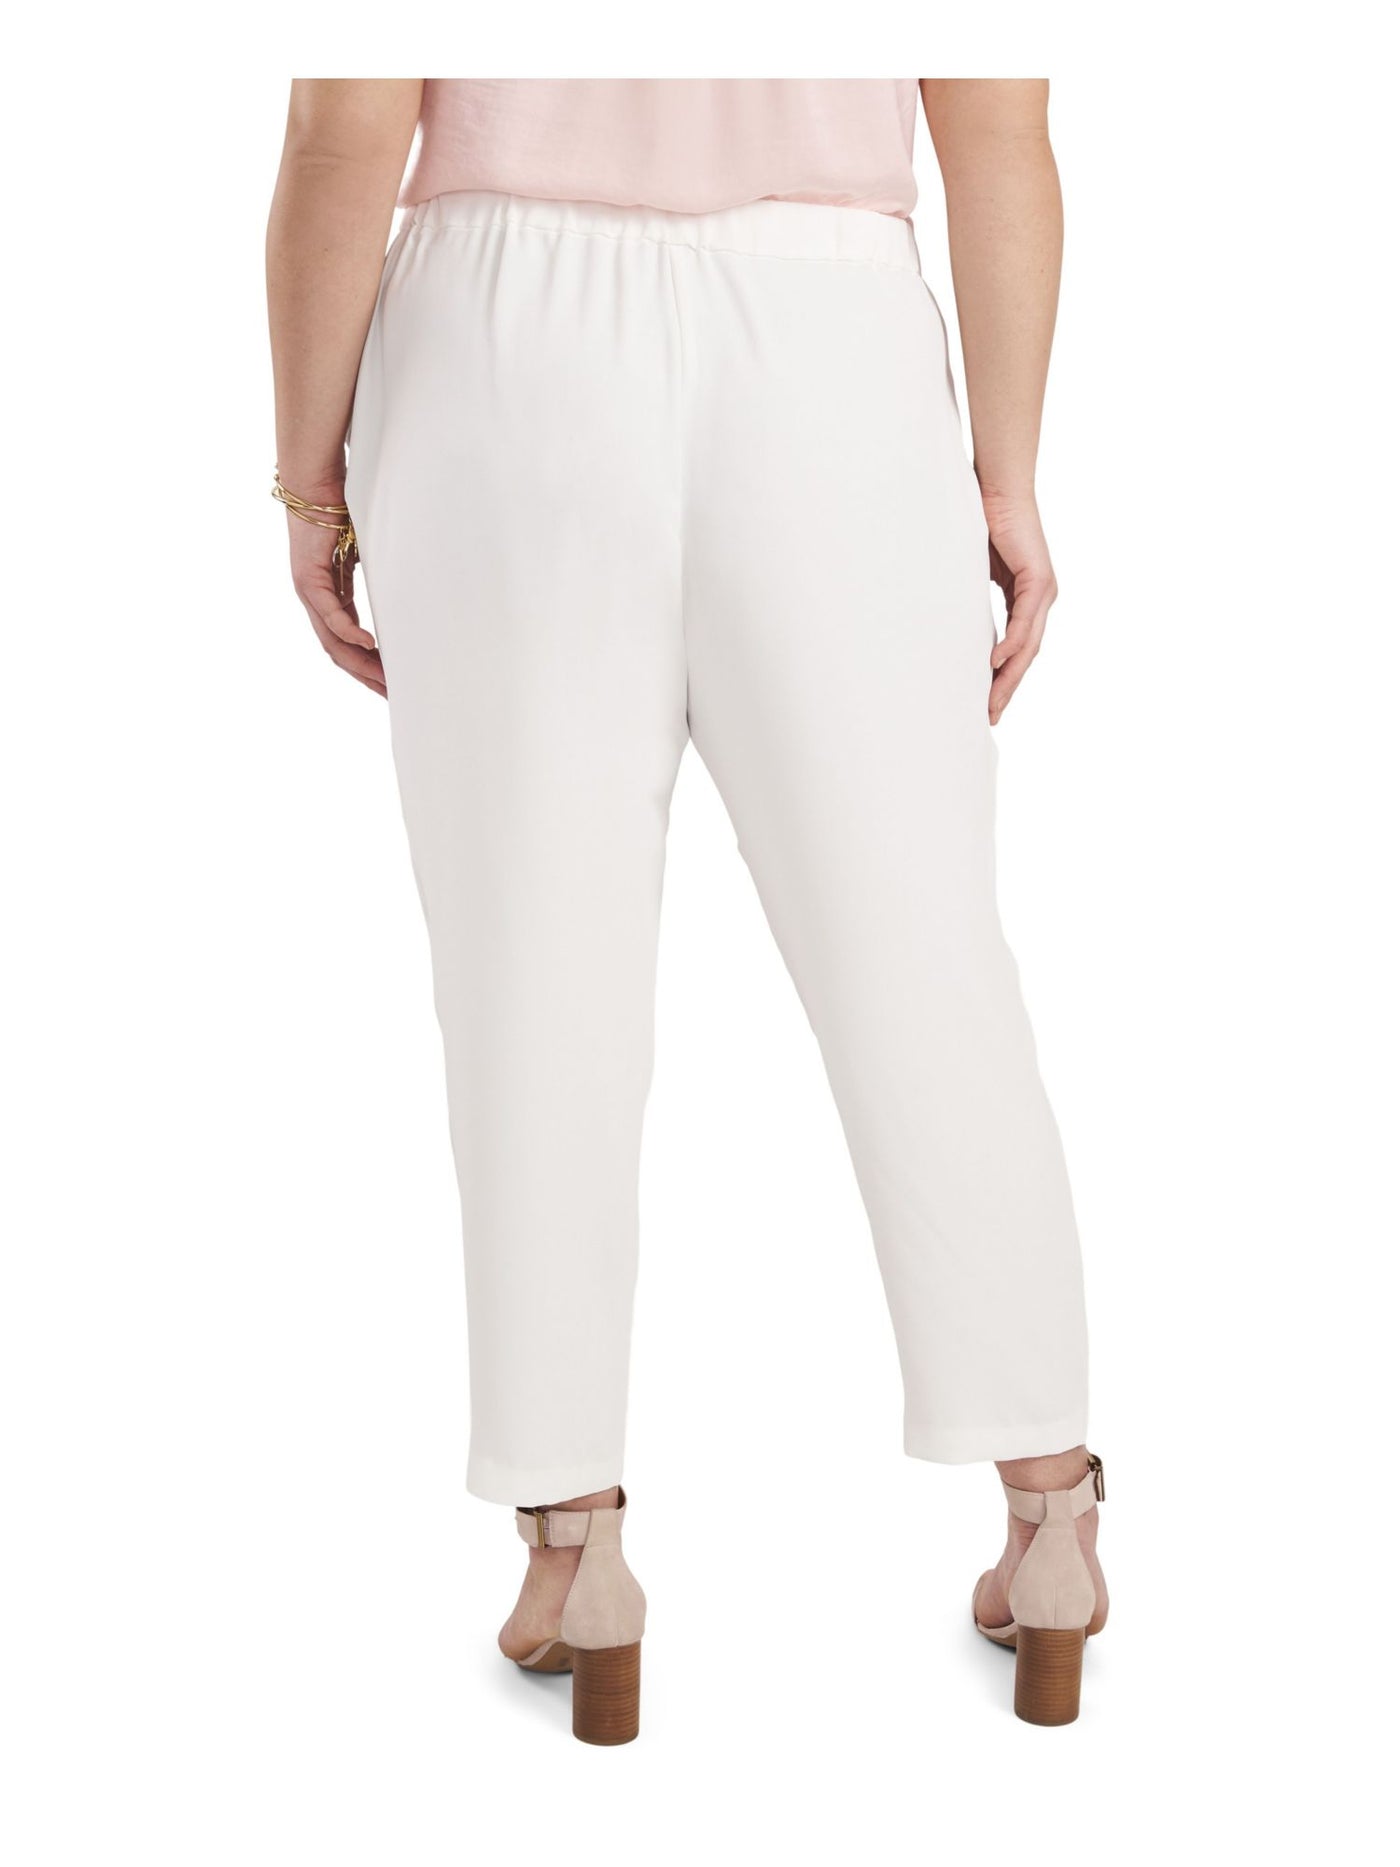 VINCE CAMUTO Womens White Stretch Pocketed Pull On Wear To Work Straight leg Pants Plus 1X